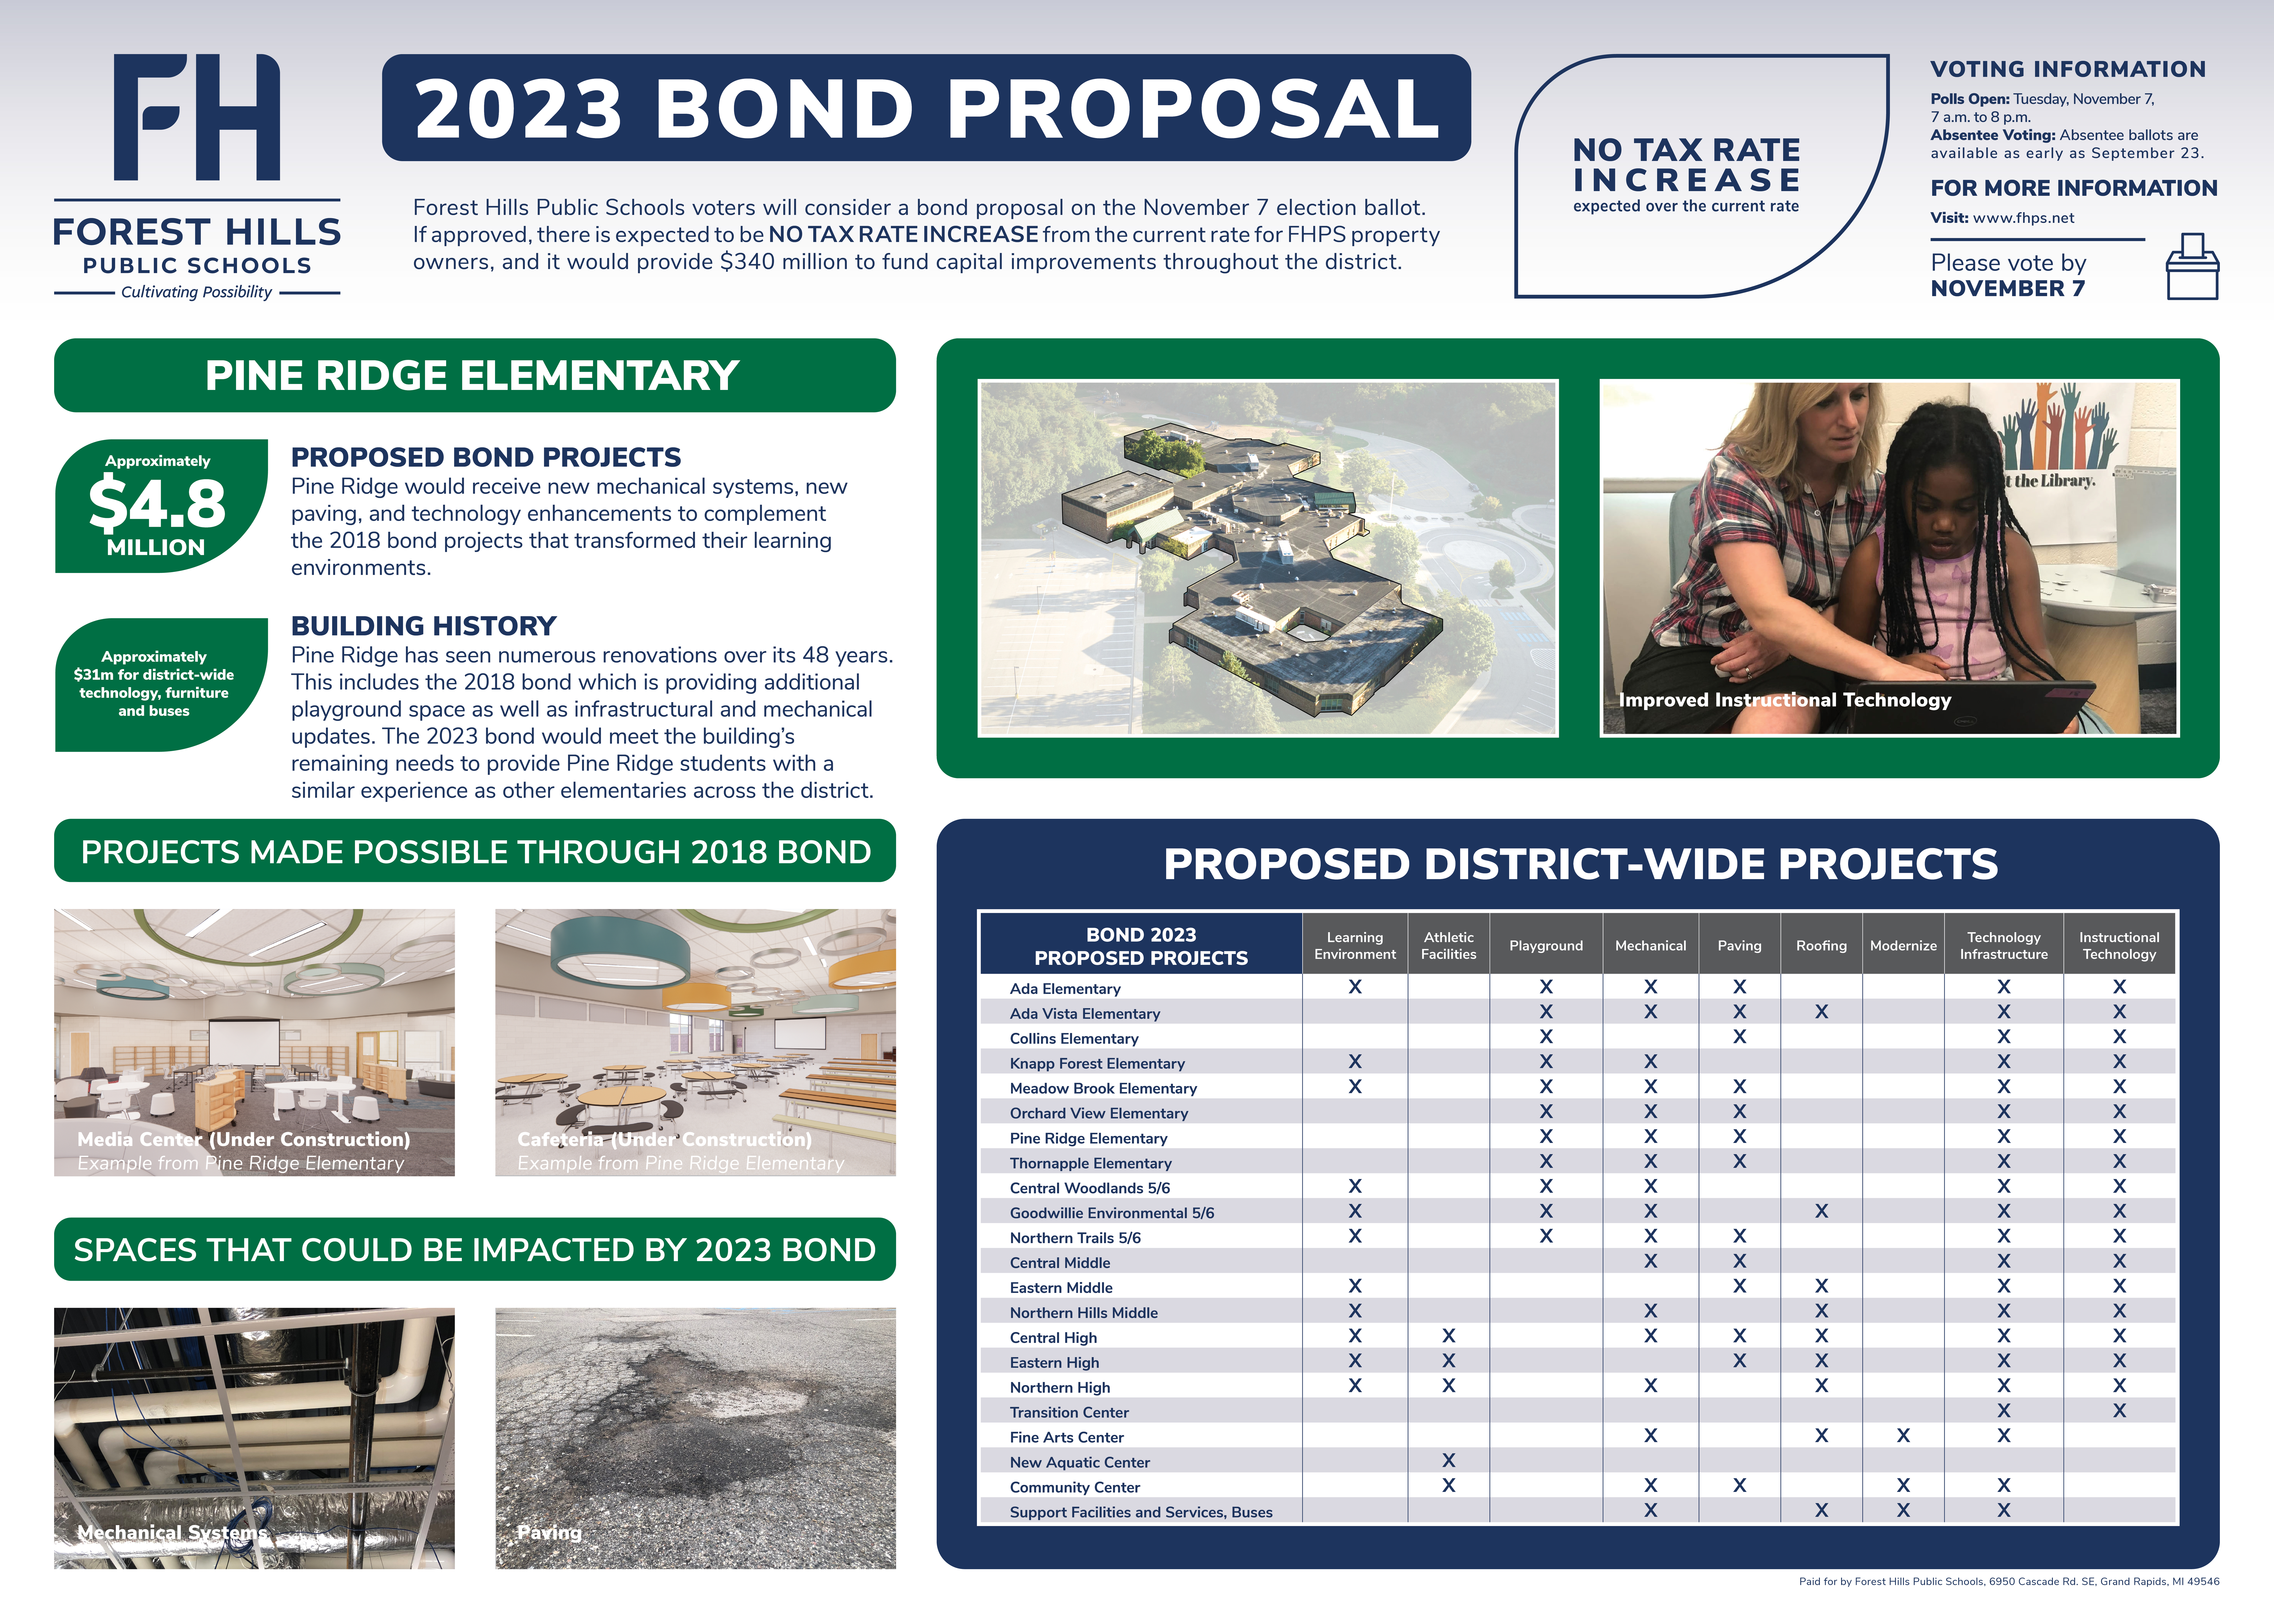 Pine Ridge and pictures of the existing building and bond project pictures from 2018 and spaces that could be impacted by the 2023 bond.